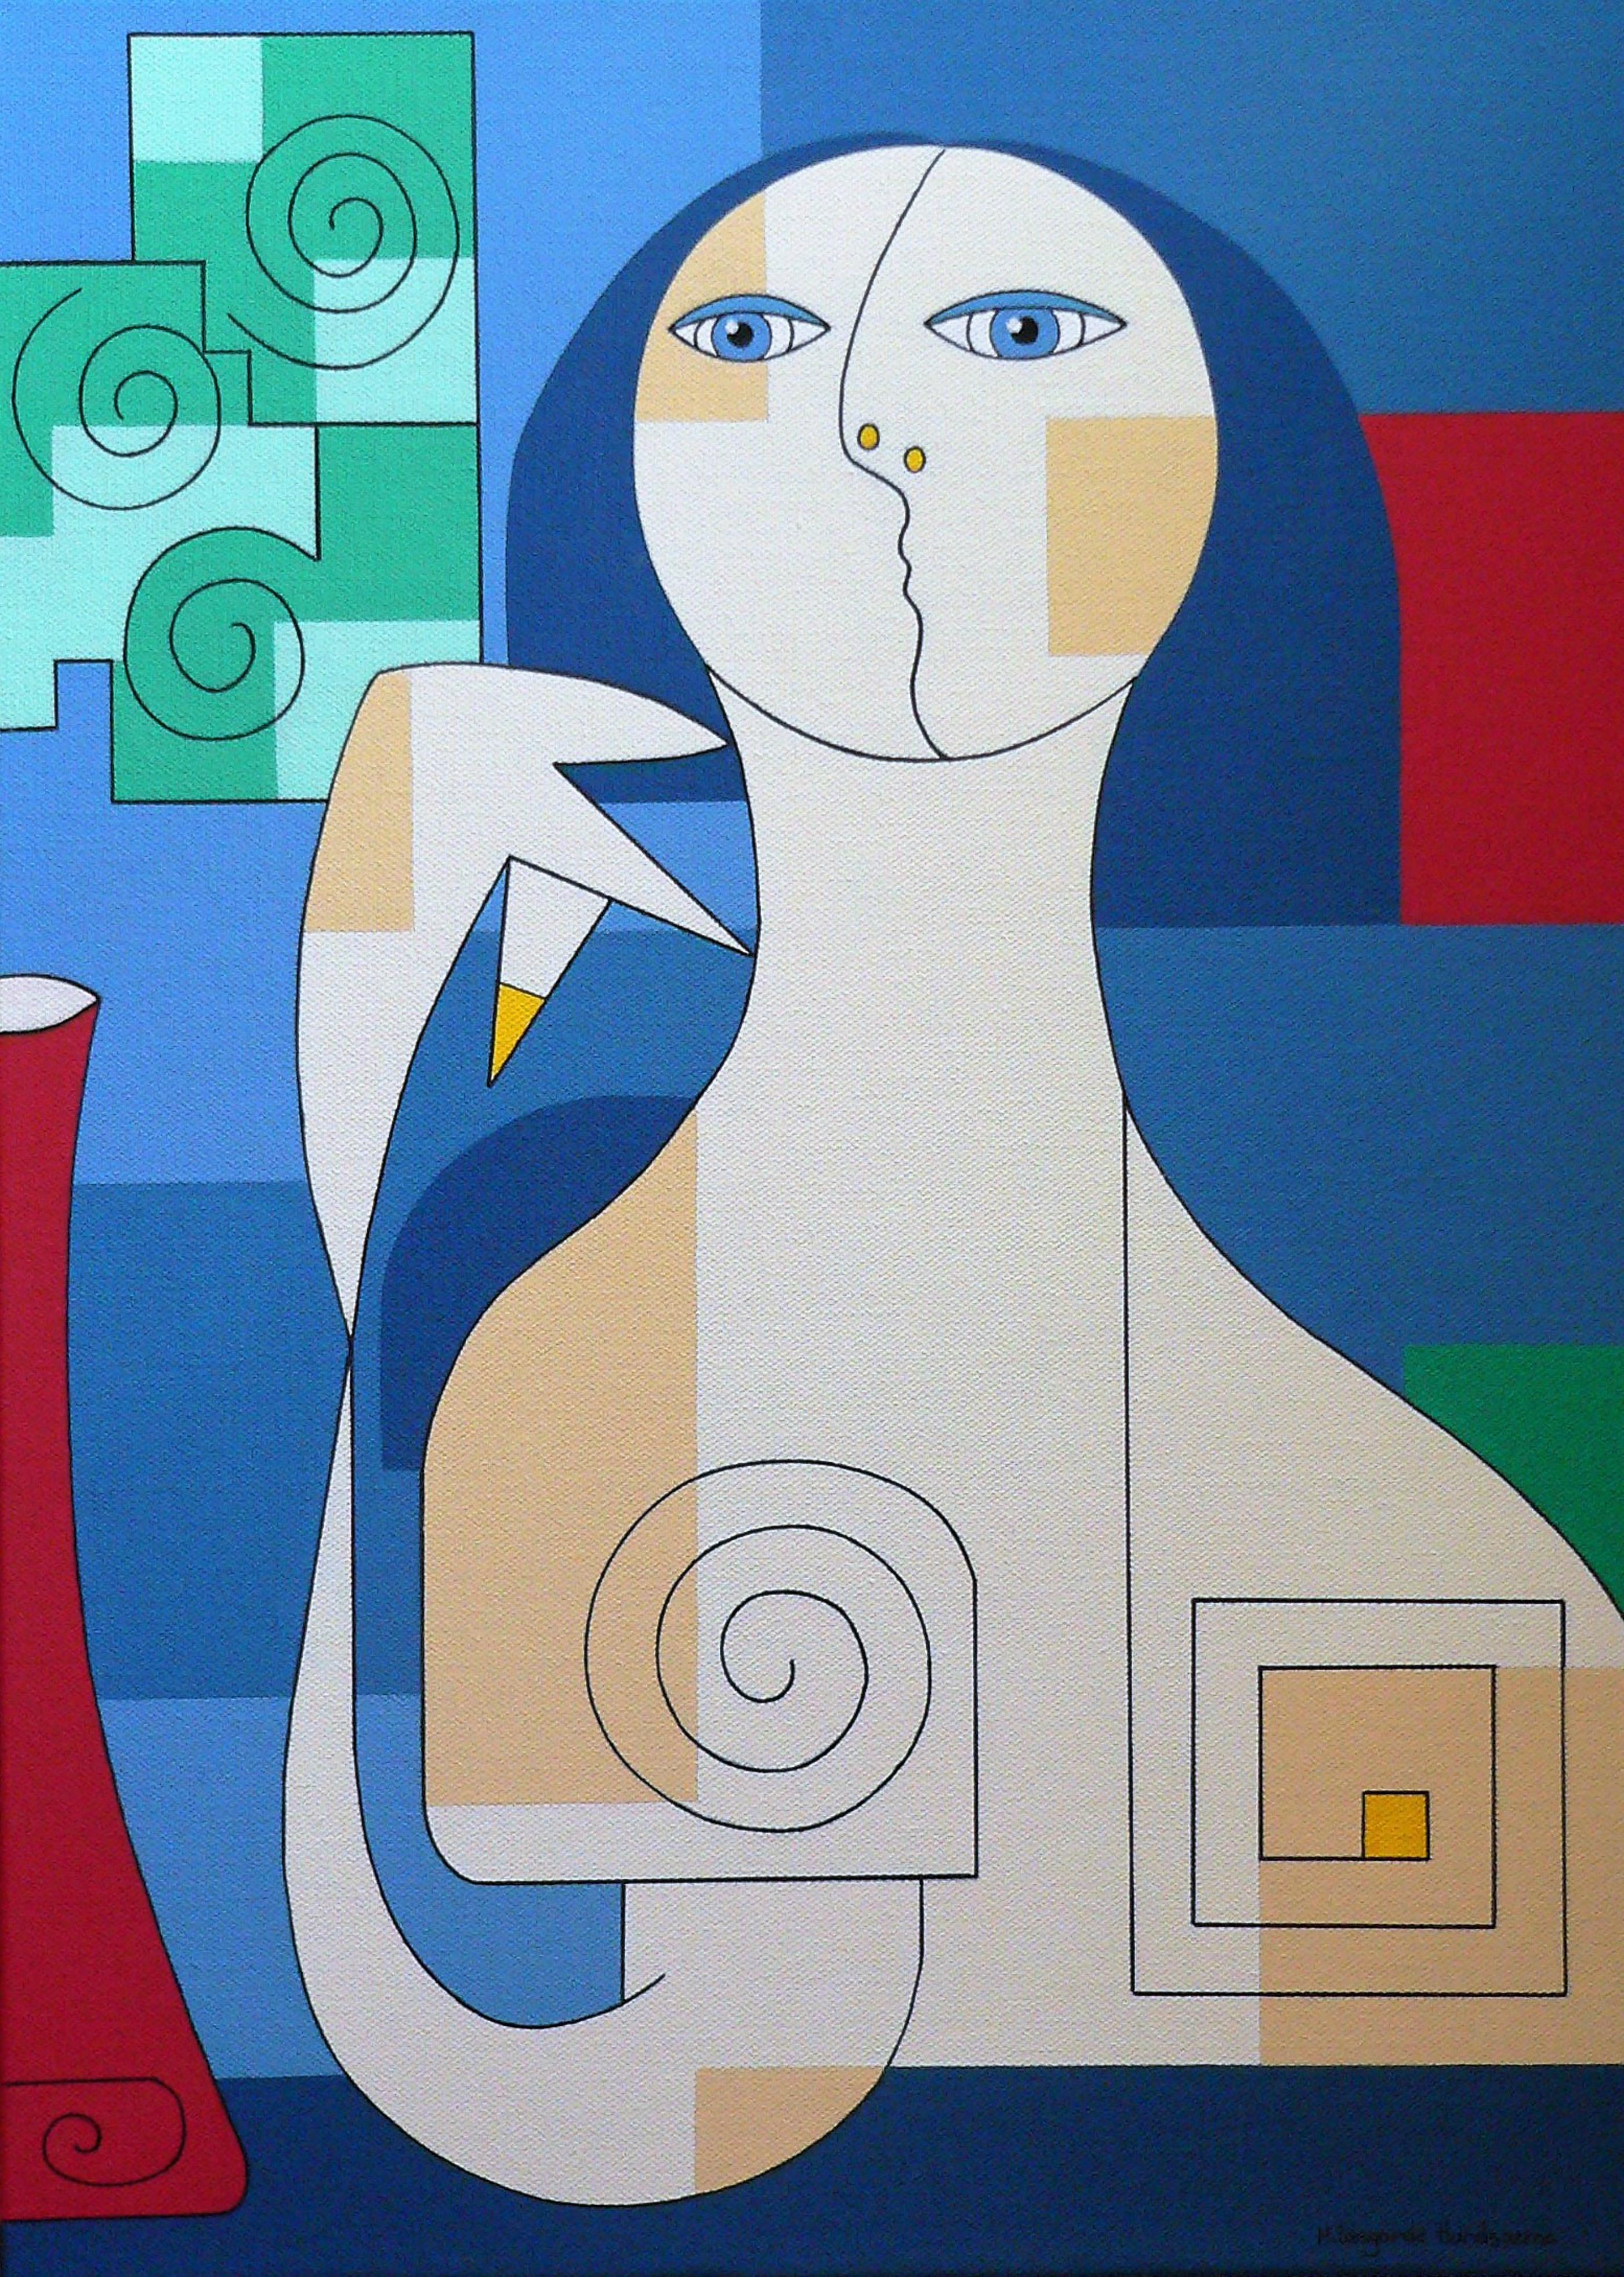 'Fiori Verdi in Vaso Rosso' by Hildegarde Handsaeme - a beautiful abstract portrait of a woman sitting next to a vase with flowers. Geometric elements, still life composition, circular shapes, and lines create a structured and balanced design. With